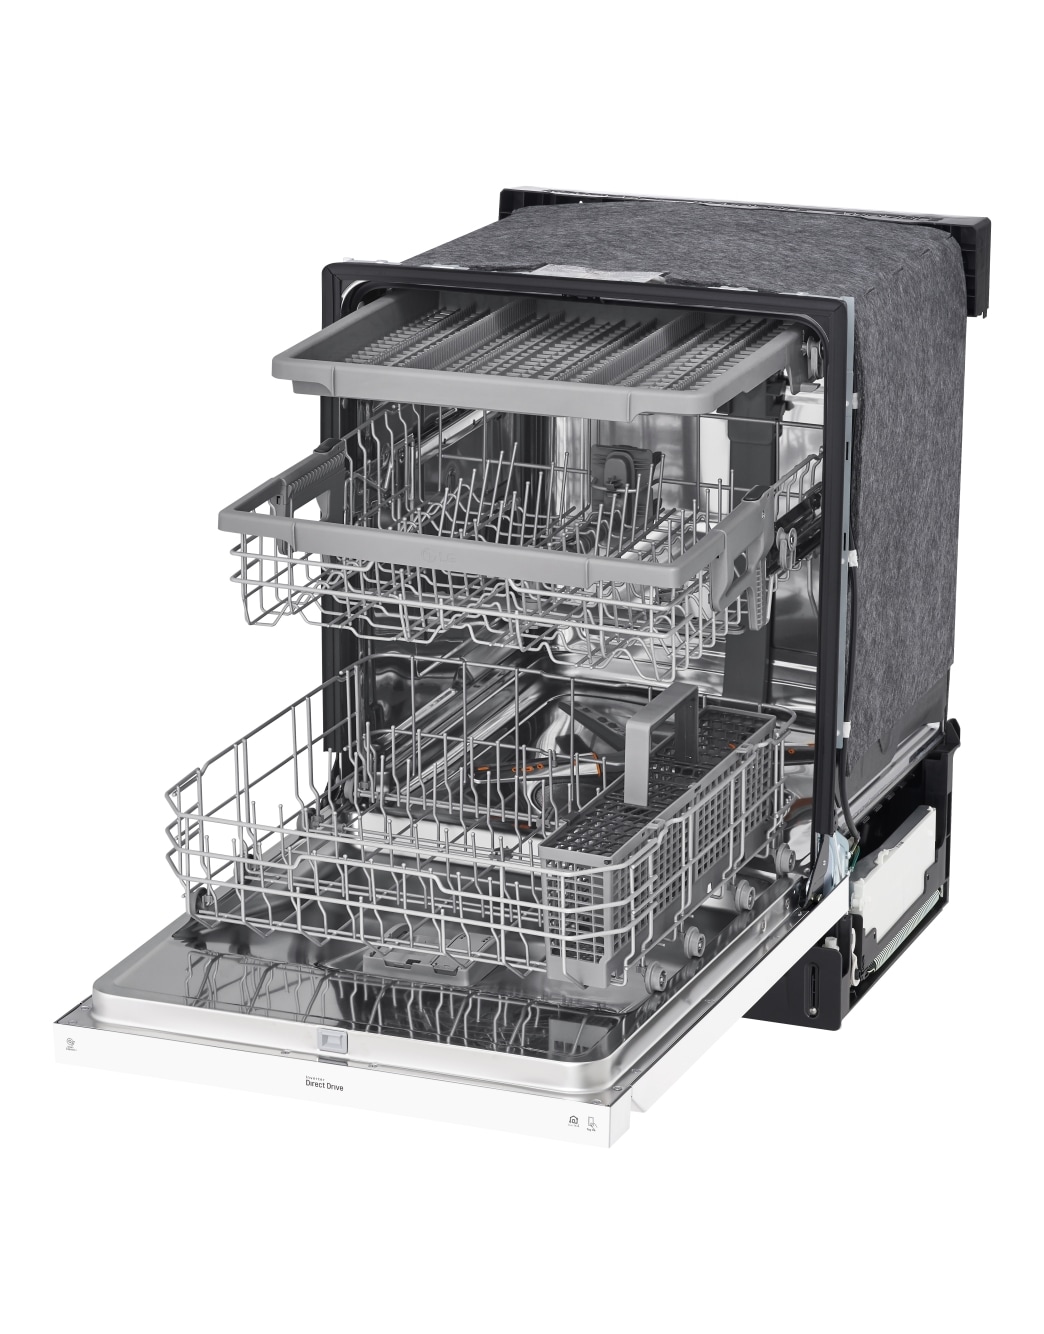 LG Front Control Dishwasher with QuadWash™ and 3rd Rack (LDFN4542W ...